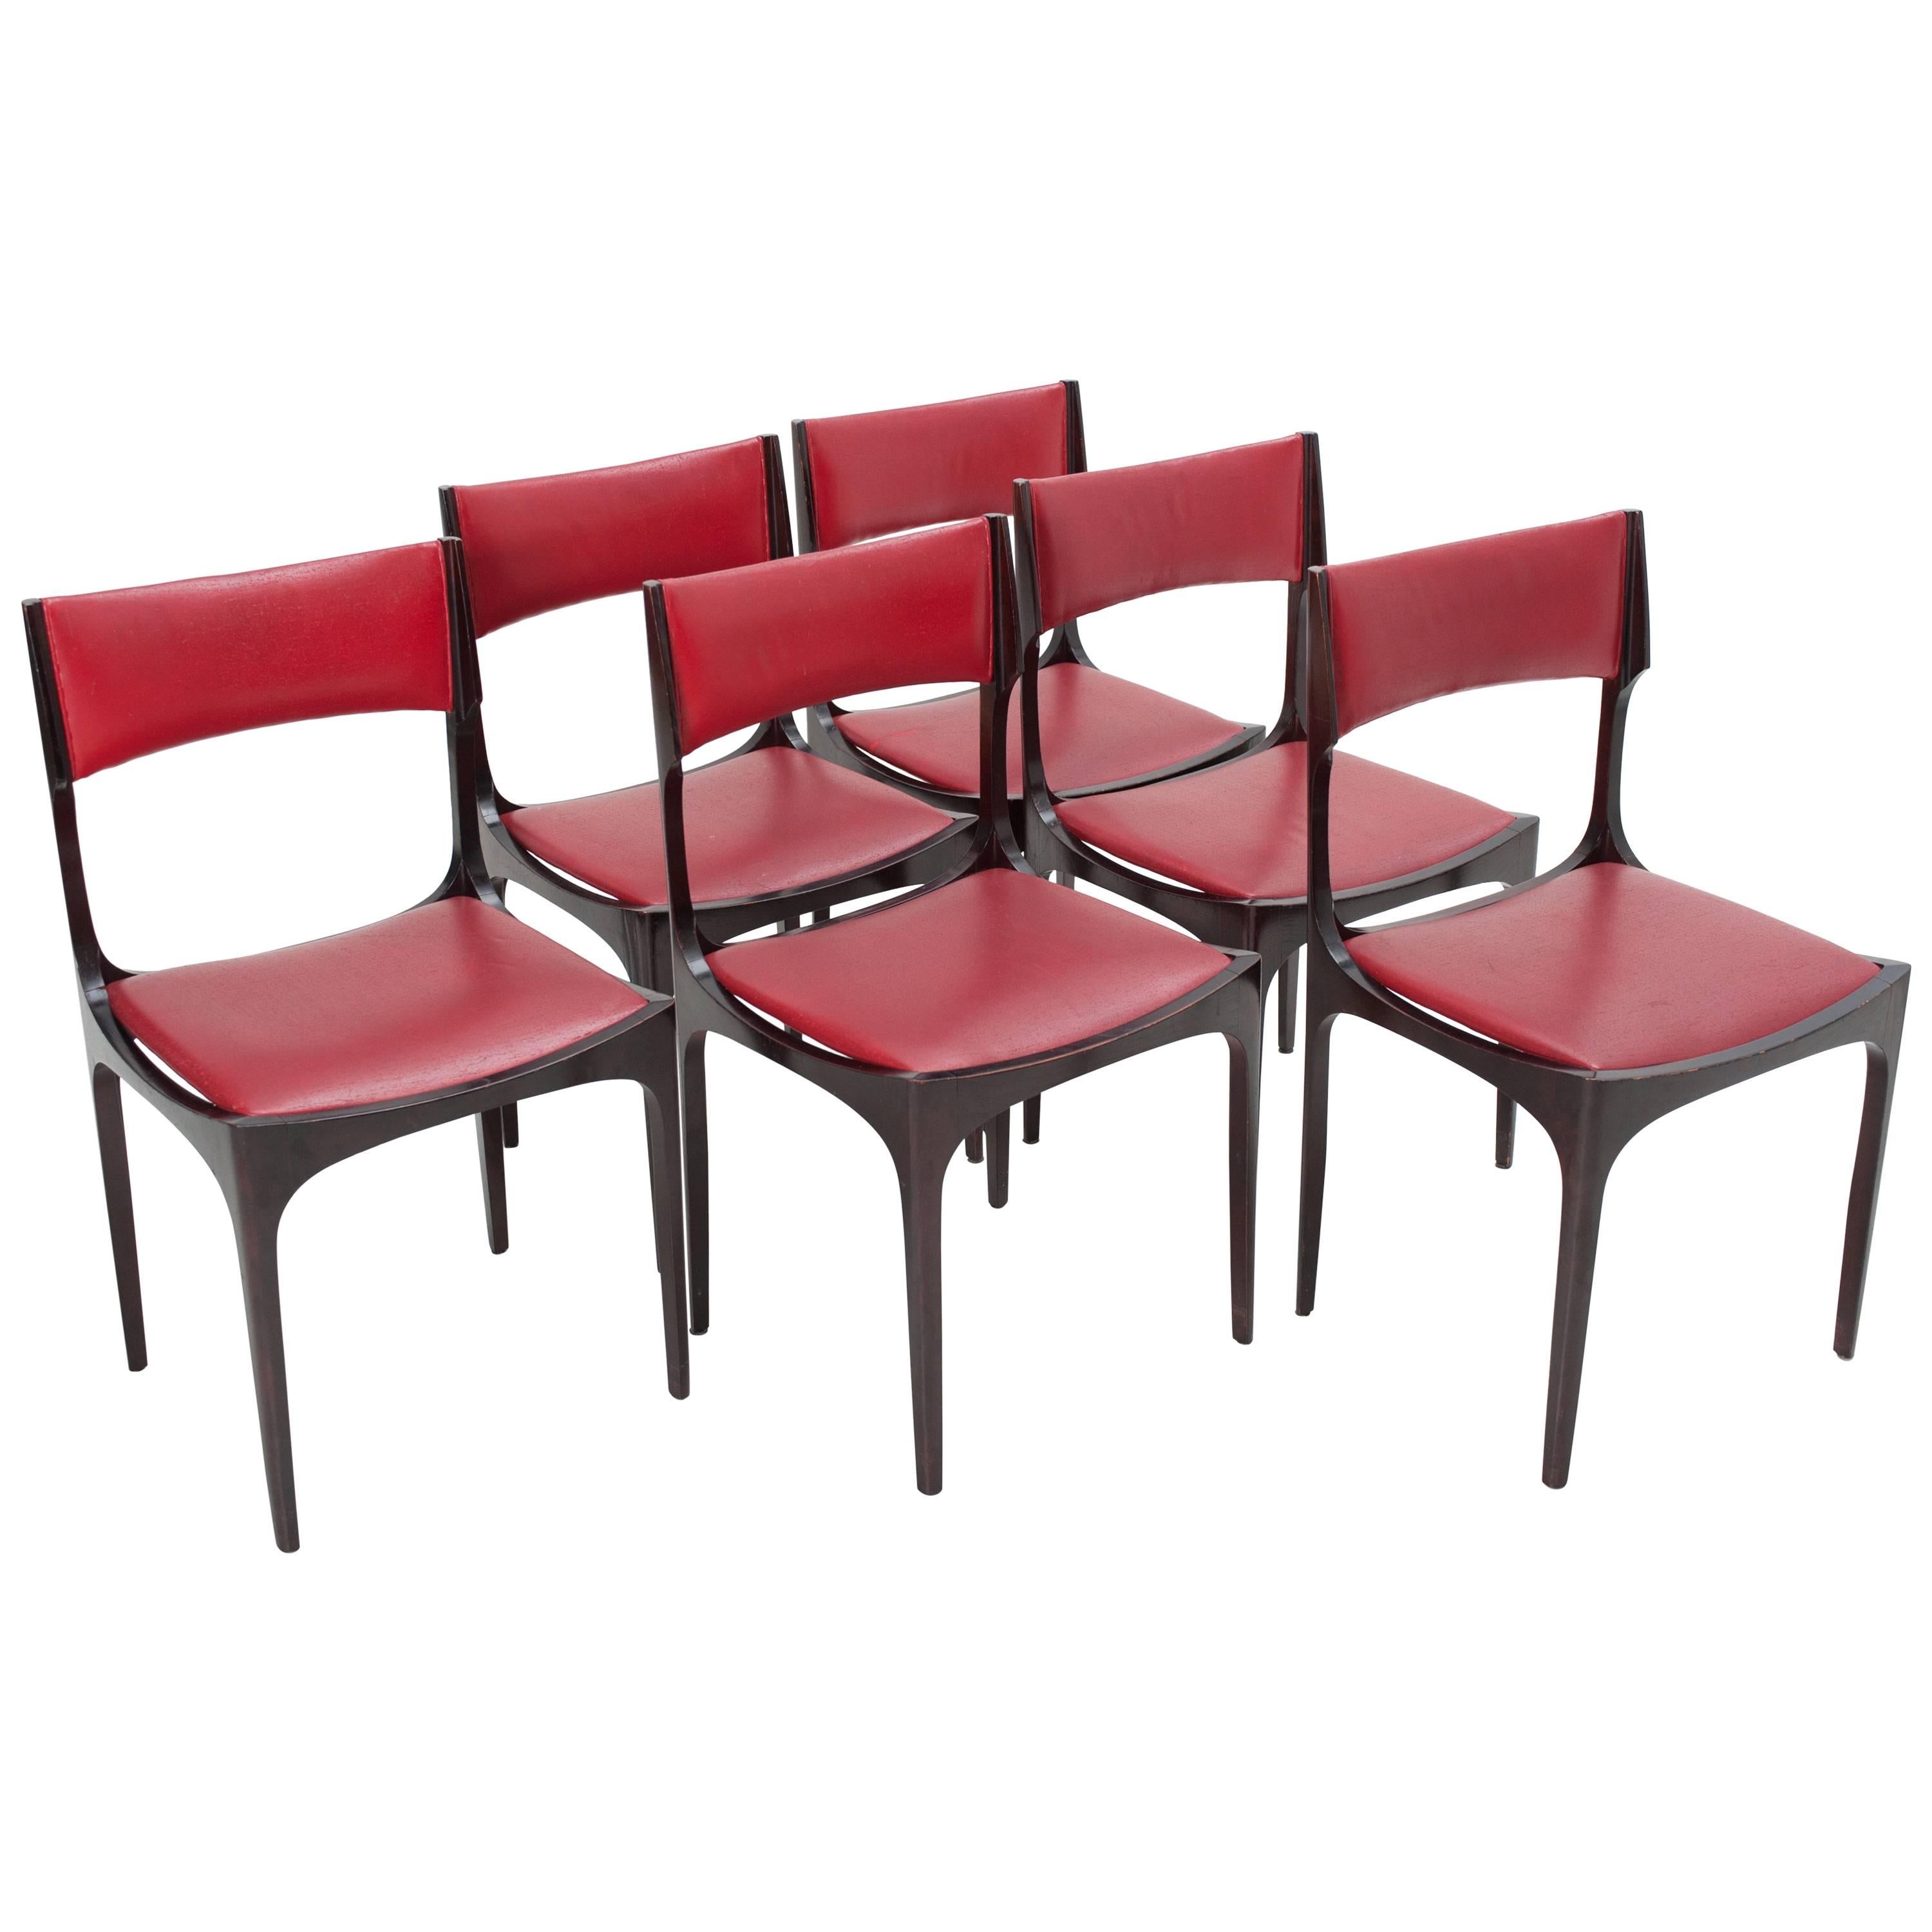 Set of Six Chairs Beatrice, Giuseppe Gibelli, 1963 For Sale